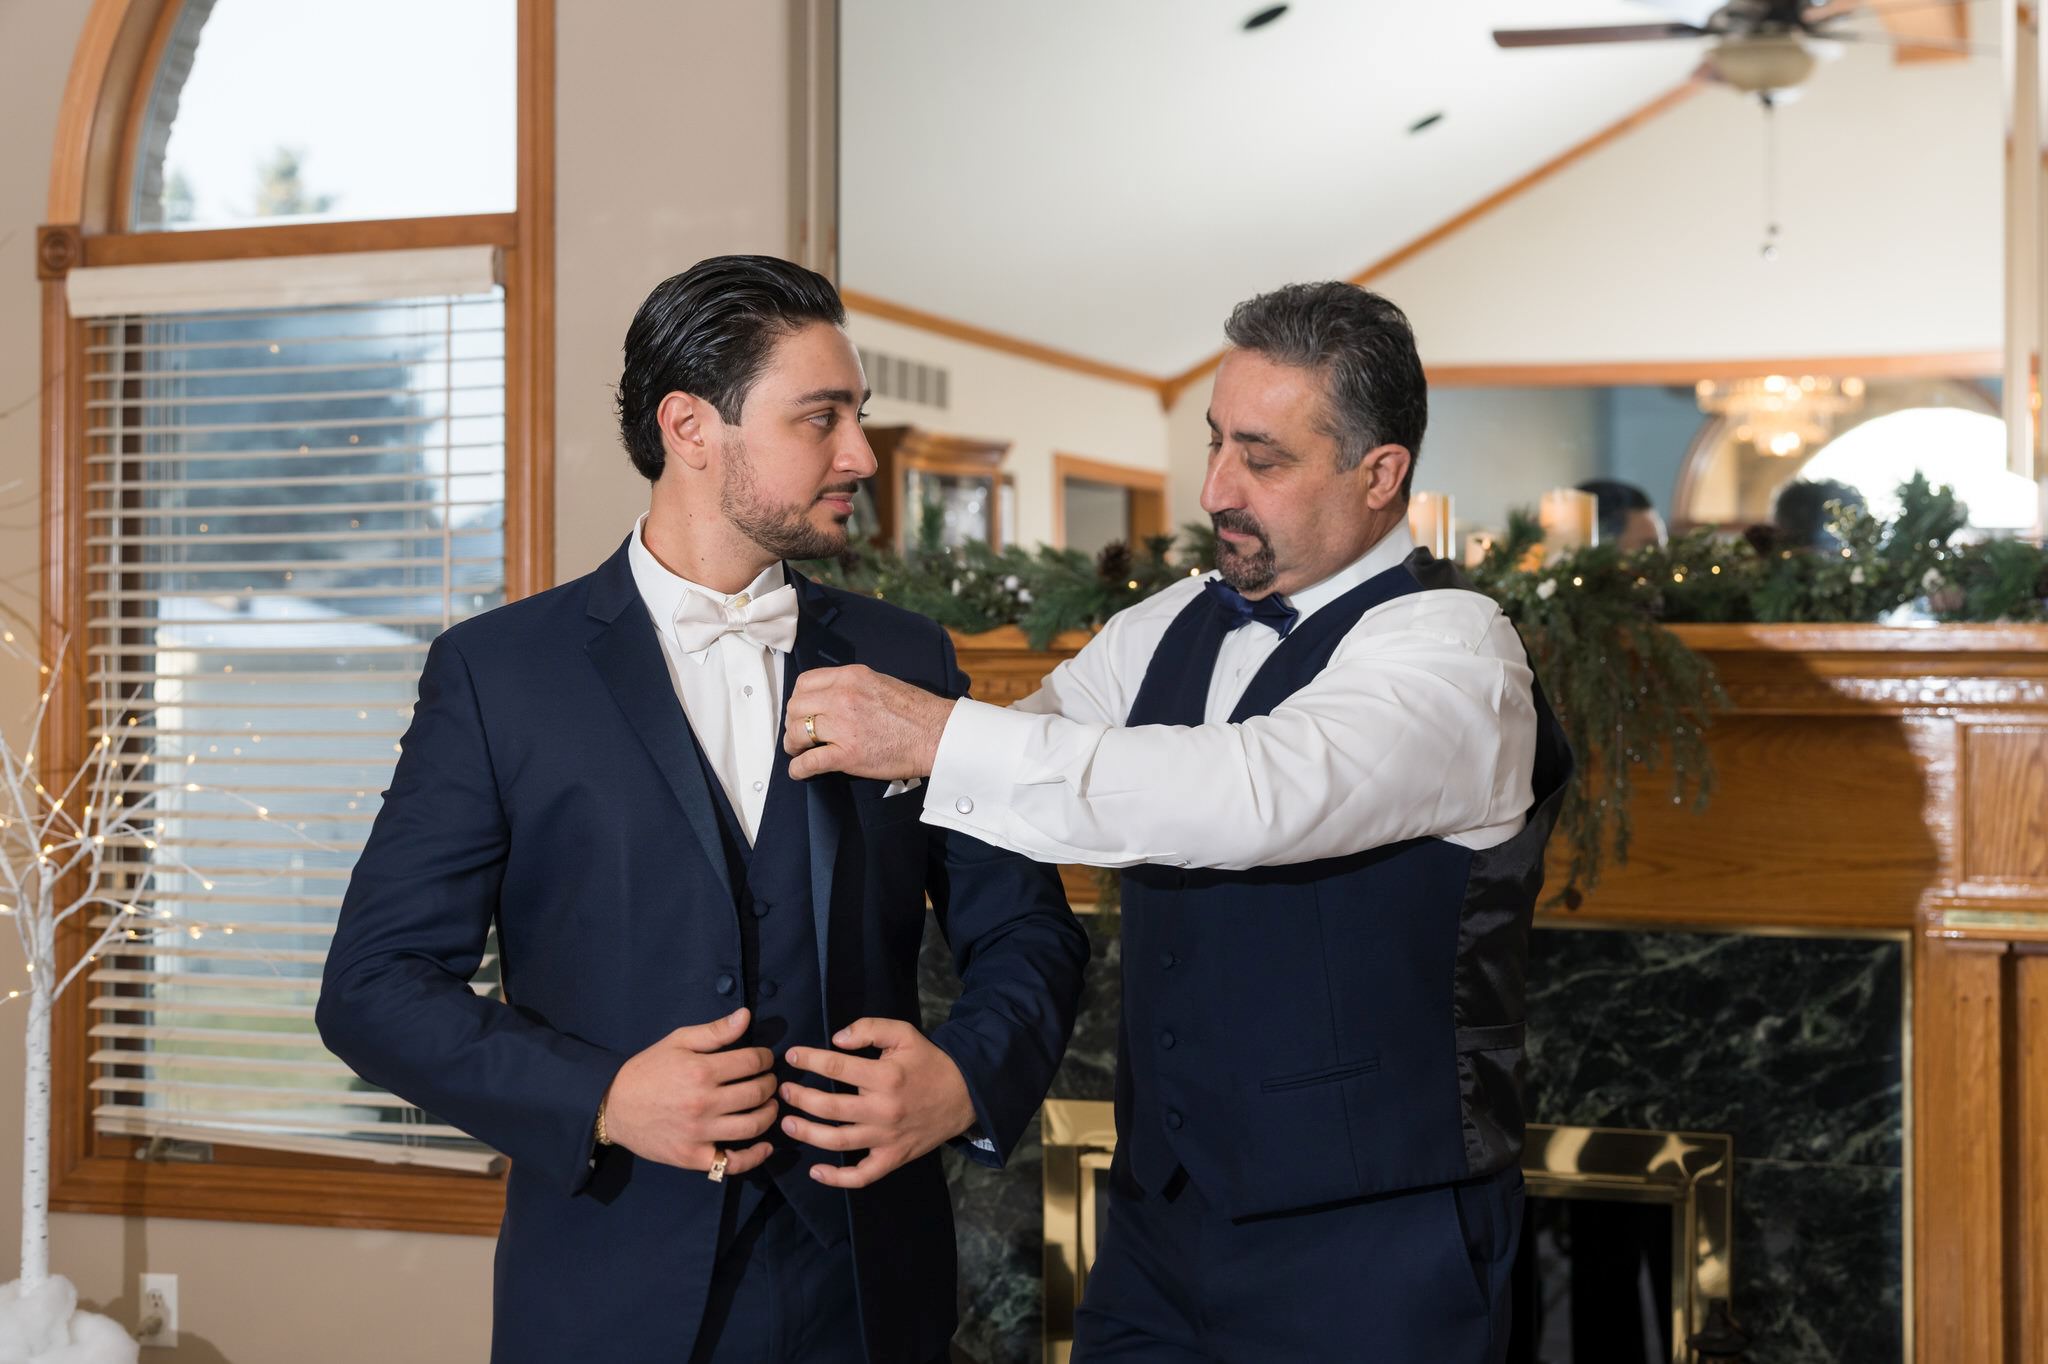 The groom receives help getting dressed from his dad on his wedding day.   